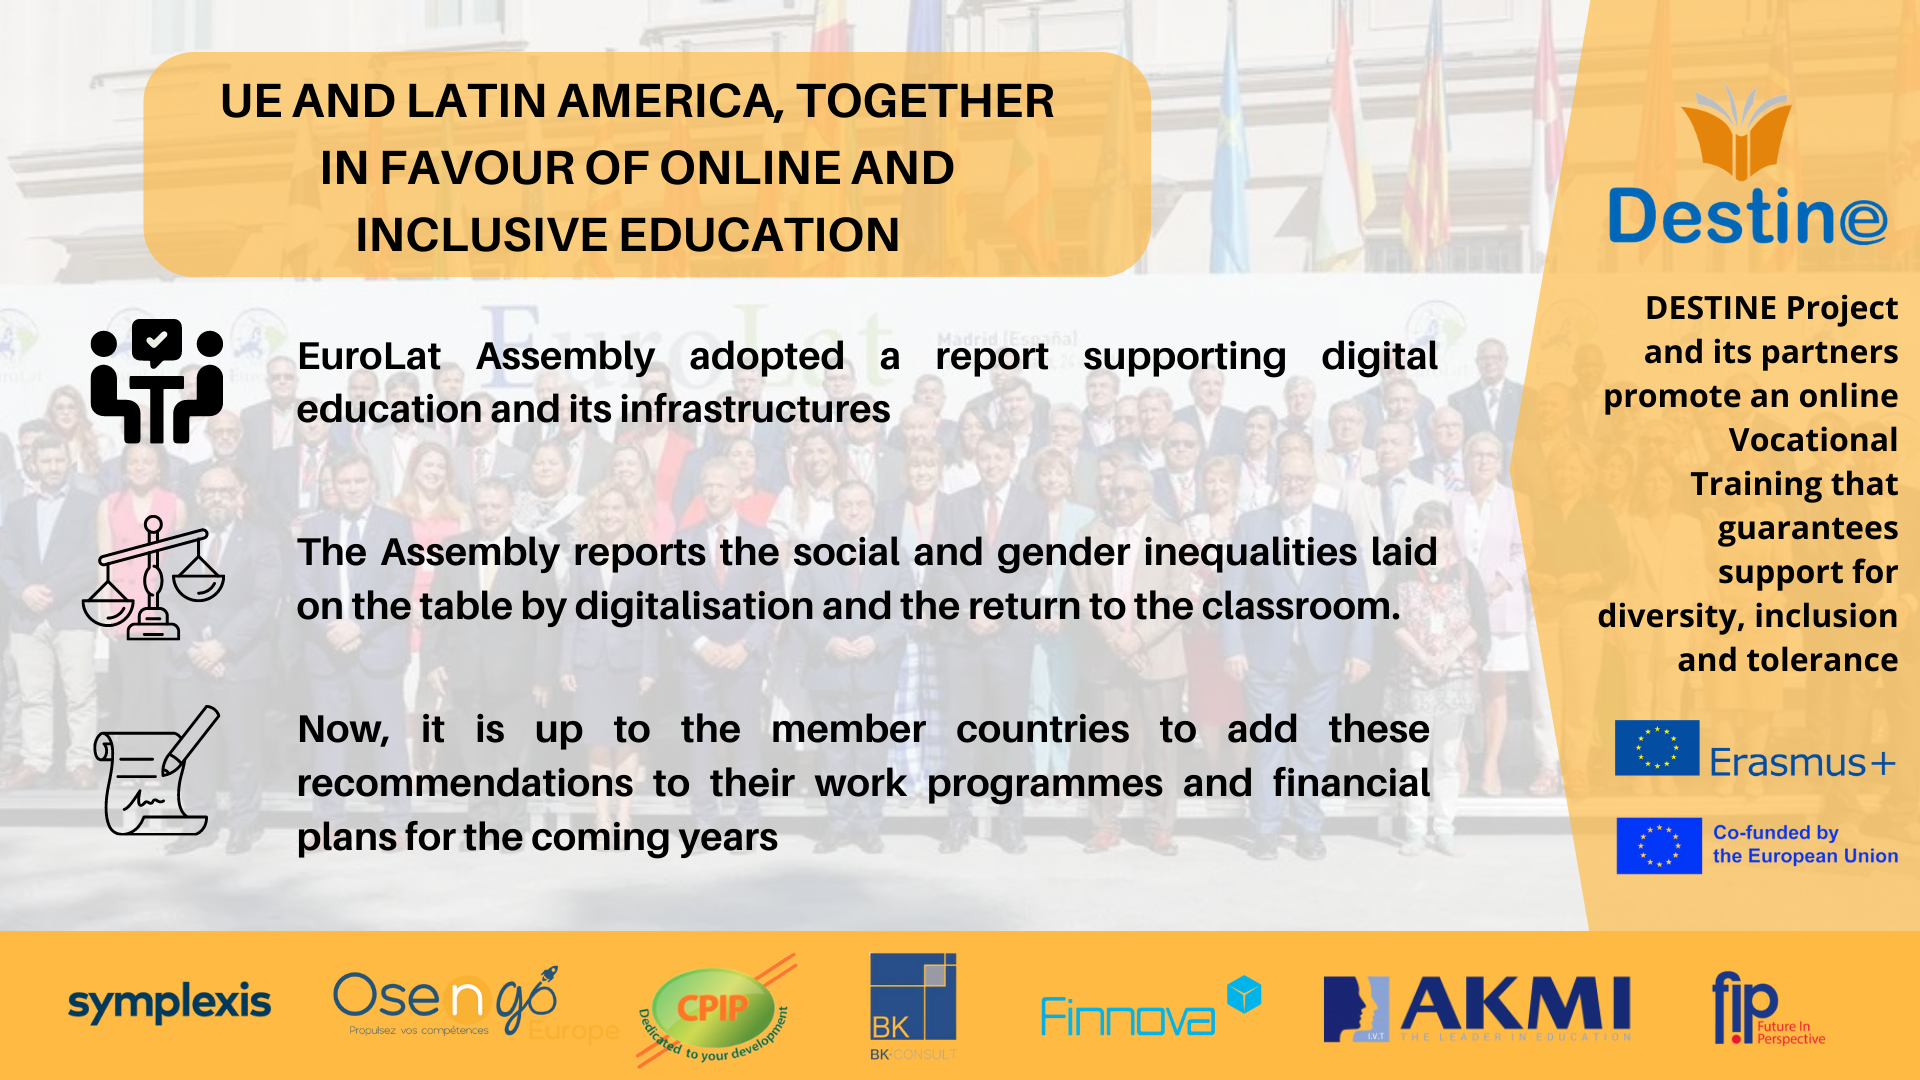 Destine welcomes EU-Latin America agreement on online and inclusive education at Eurolat Assembly